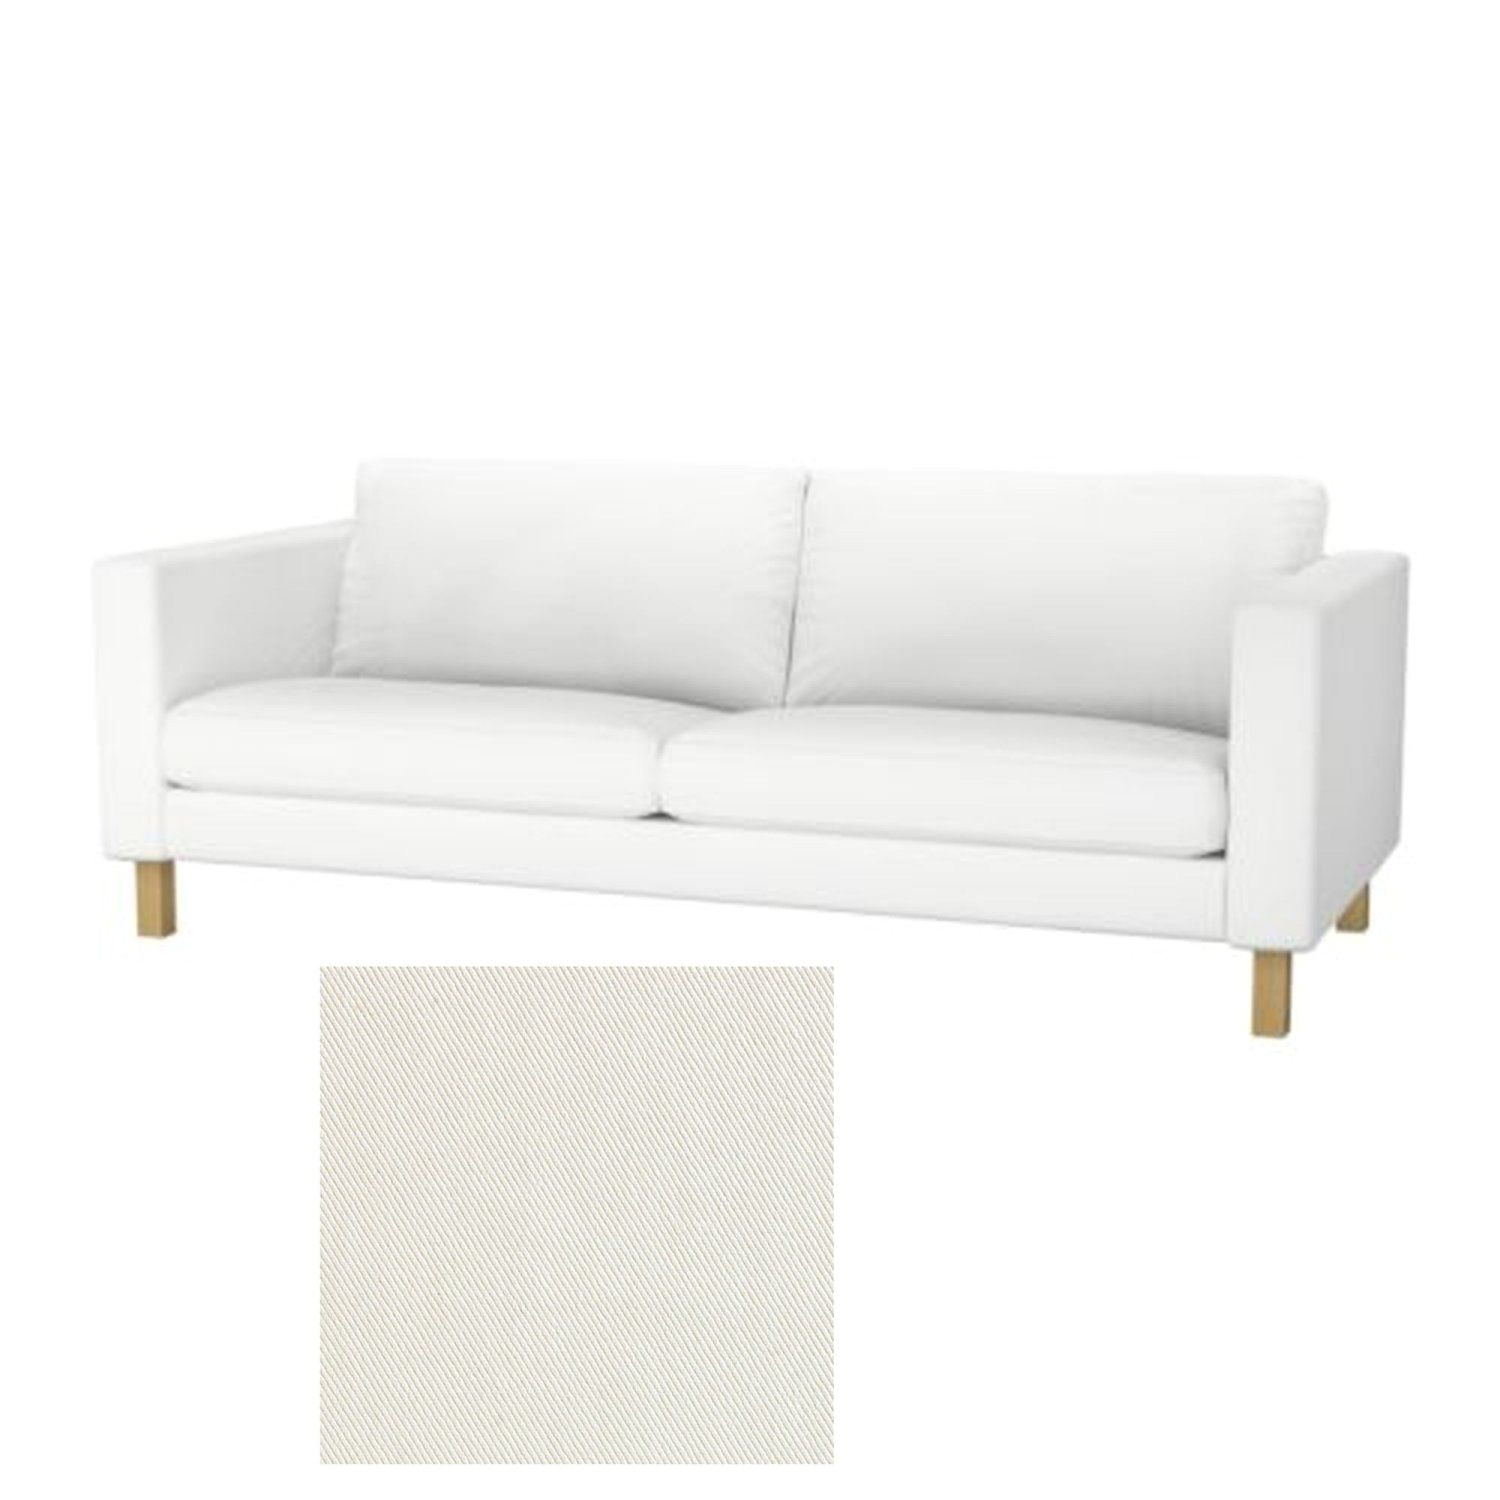 klippan loveseat ikea easy to keep clean wipe with a sponge dampened with water or a mild detergent for the studio pinterest ikea loveseat